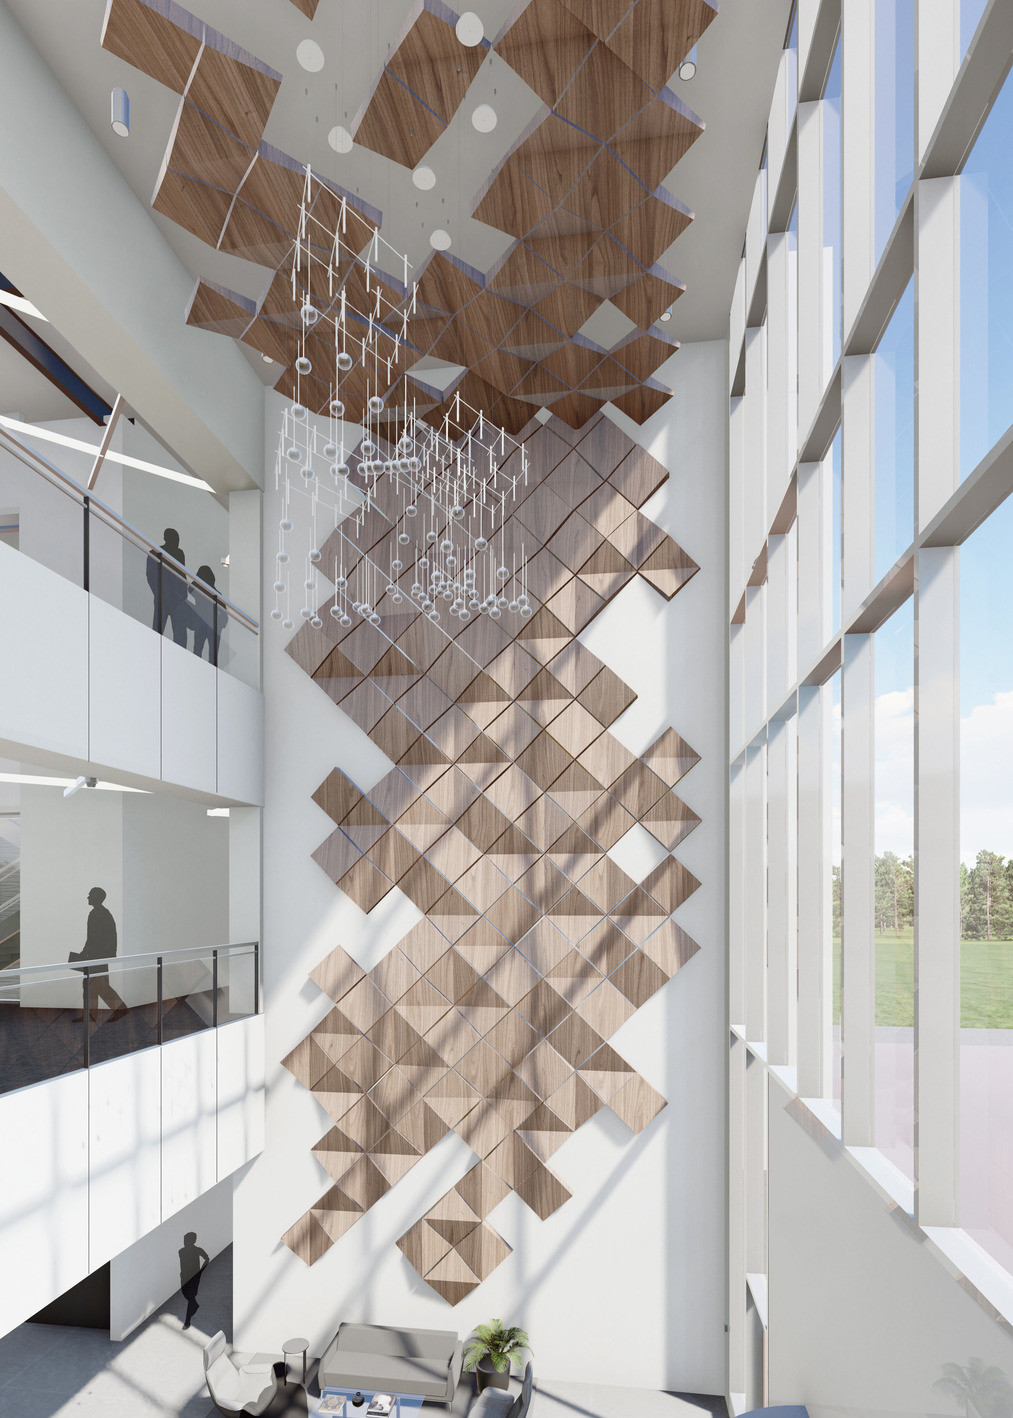 Triple height atrium with windows, left, and walkways, right. Abstract wall detail of square wood panels on wall and ceiling